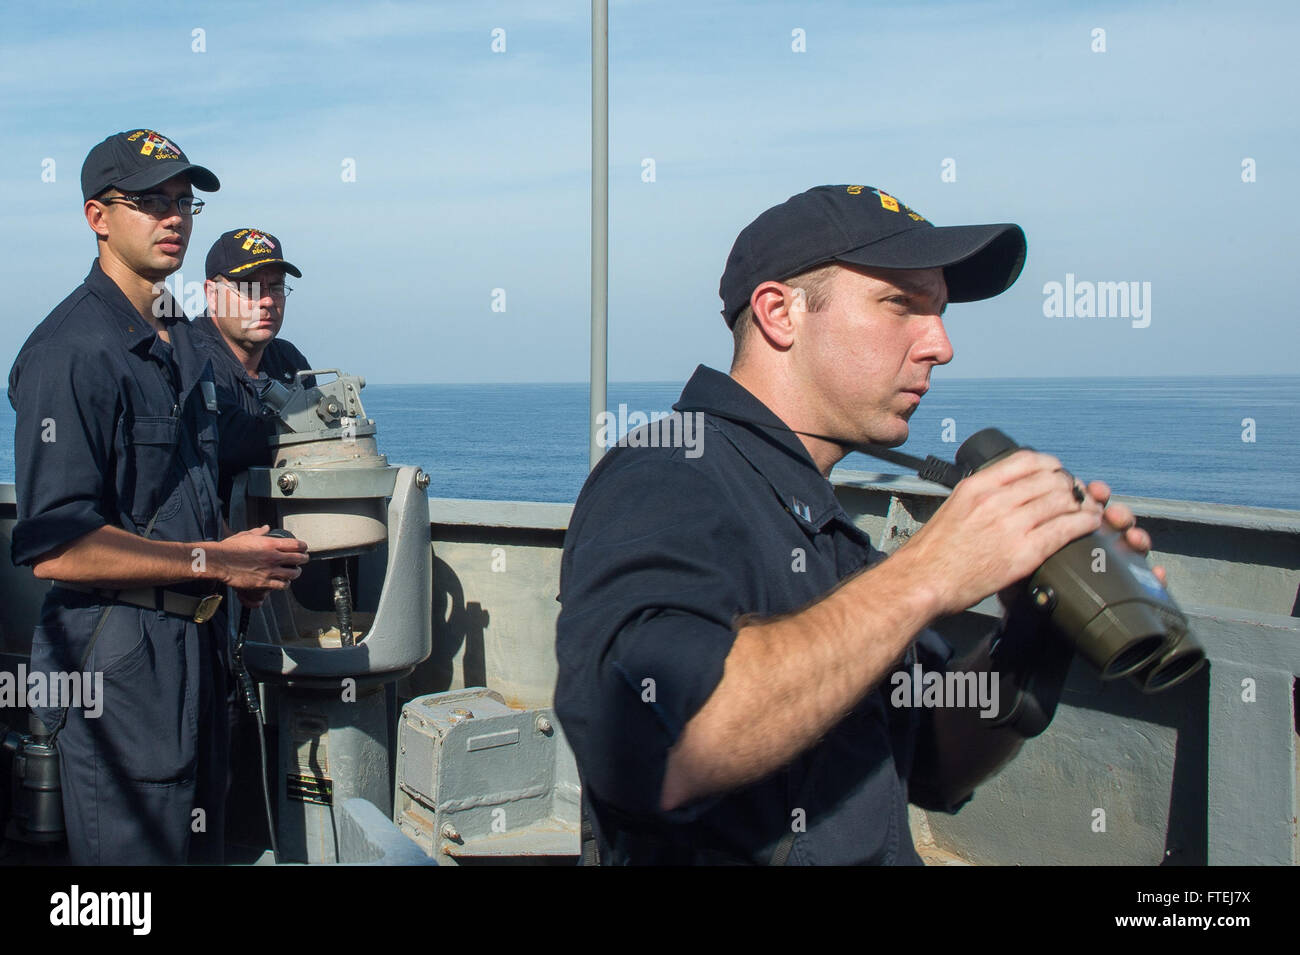 MEDITERRANEAN SEA (November 11, 2014) – Lt. Douglas Kroh, from Deltona, verifies the range of a nearby vessel aboard the Arliegh Burke-class guided-missile destroyer USS Cole (DDG 67) during exercise Mavi Balina 2014. Exercise Mavi Balina is a biennial Turkish-led anti-submarine warfare maritime exercise involving NATO and regional forces in the eastern Mediterranean to improve interoperability and increase tactical proficiencies. Stock Photo